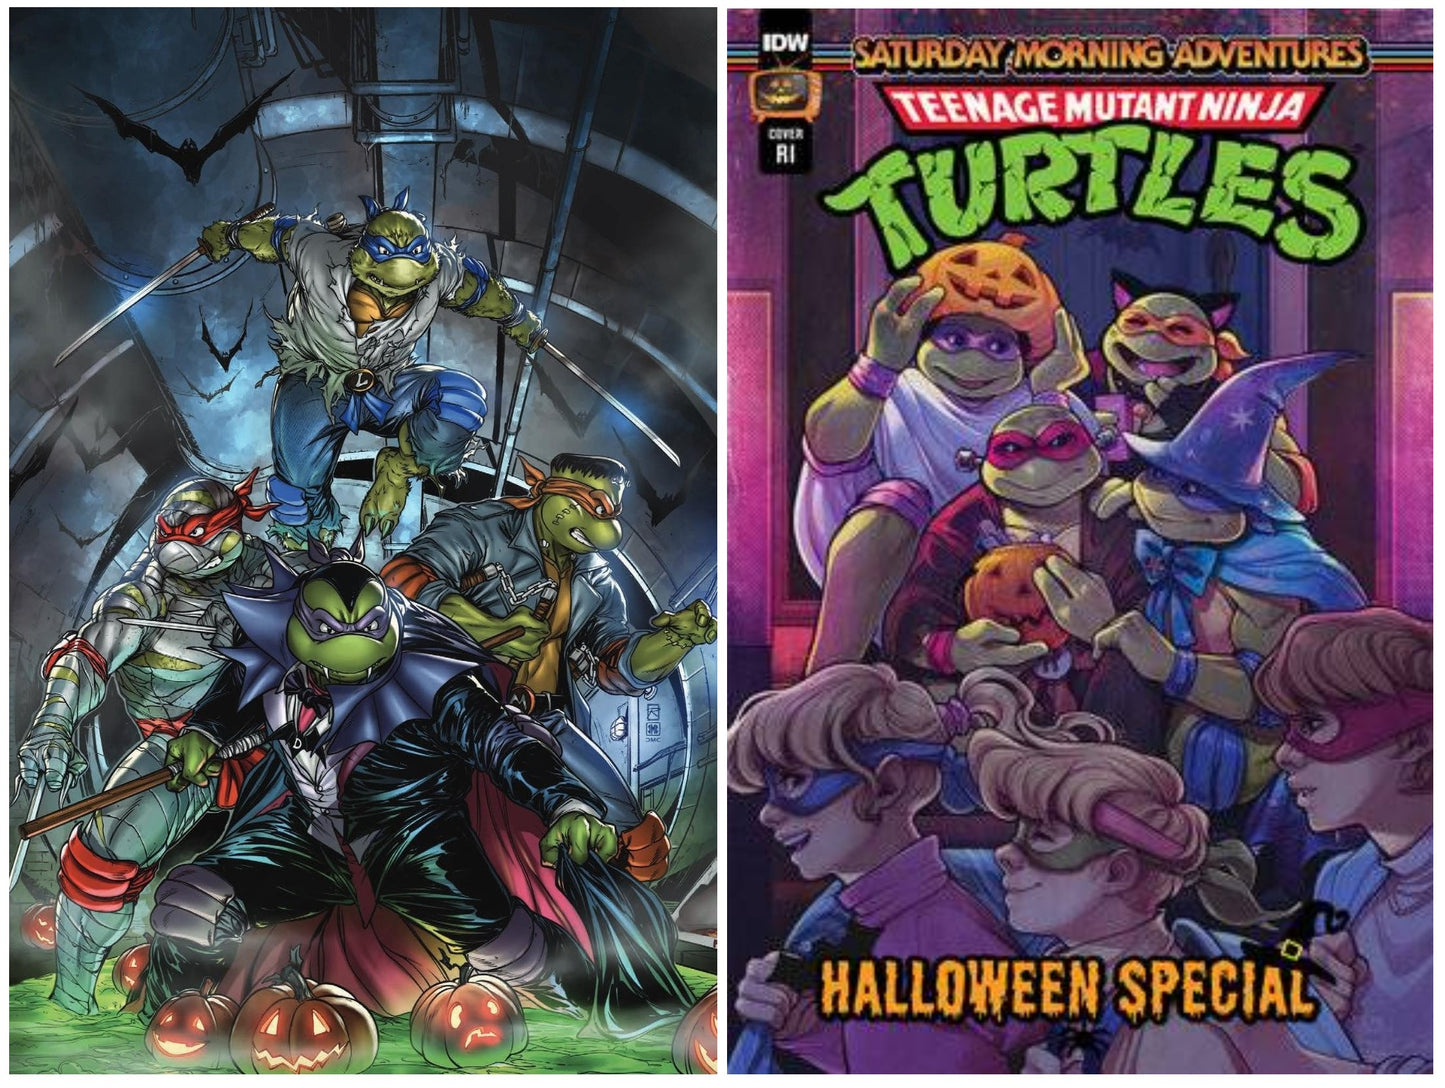 TMNT SATURDAY MORNING ADV HALLOWEEN SPECIAL #1 RAYMOND GAY NYCC 2023 VIRGIN VARIANT LIMITED TO 1000 COPIES + 1:10 VARIANT